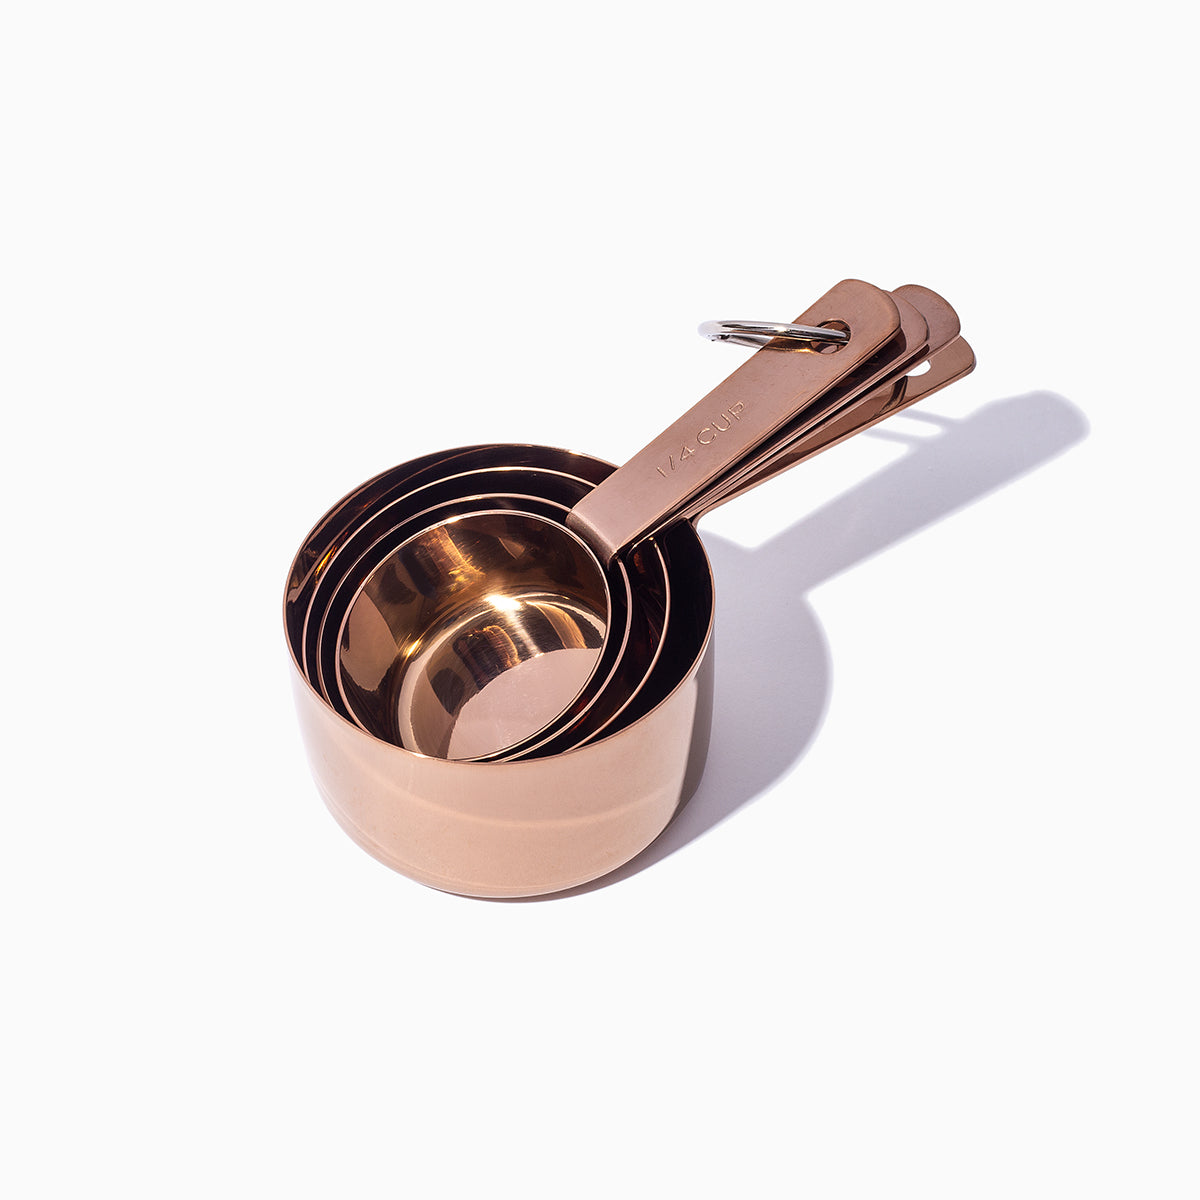 Measuring Cups | Product Detail Image | Uncommon James Home